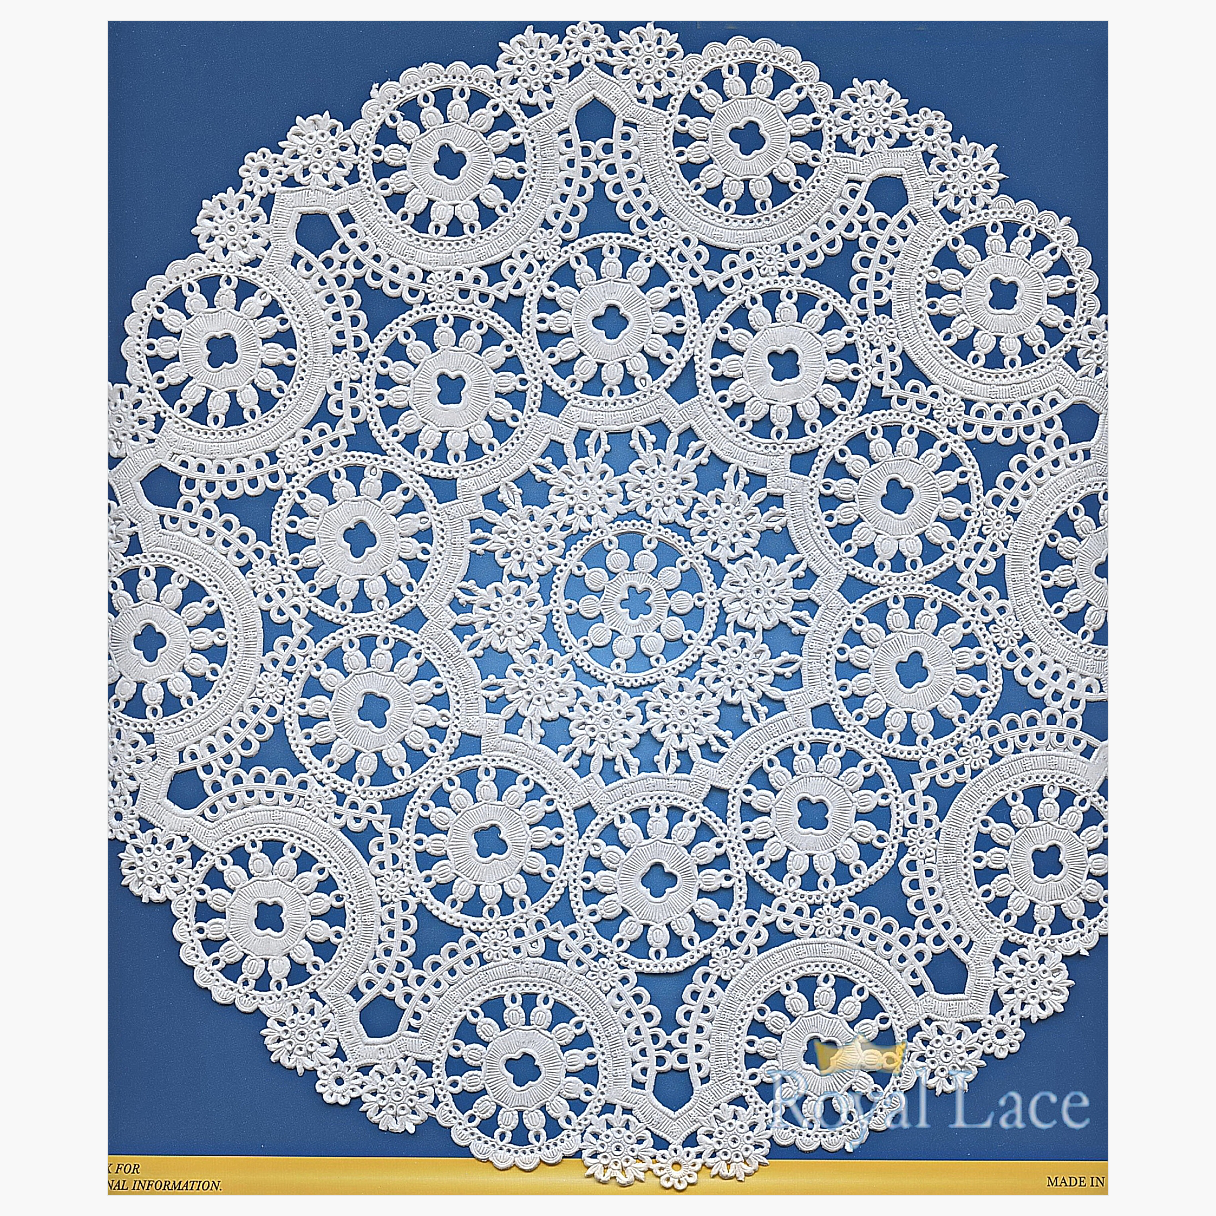 8.5 White Lace Paper Doilies Disposable Party Table Decor (50-PACK) on  Sale Now!, Chinese Lanterns